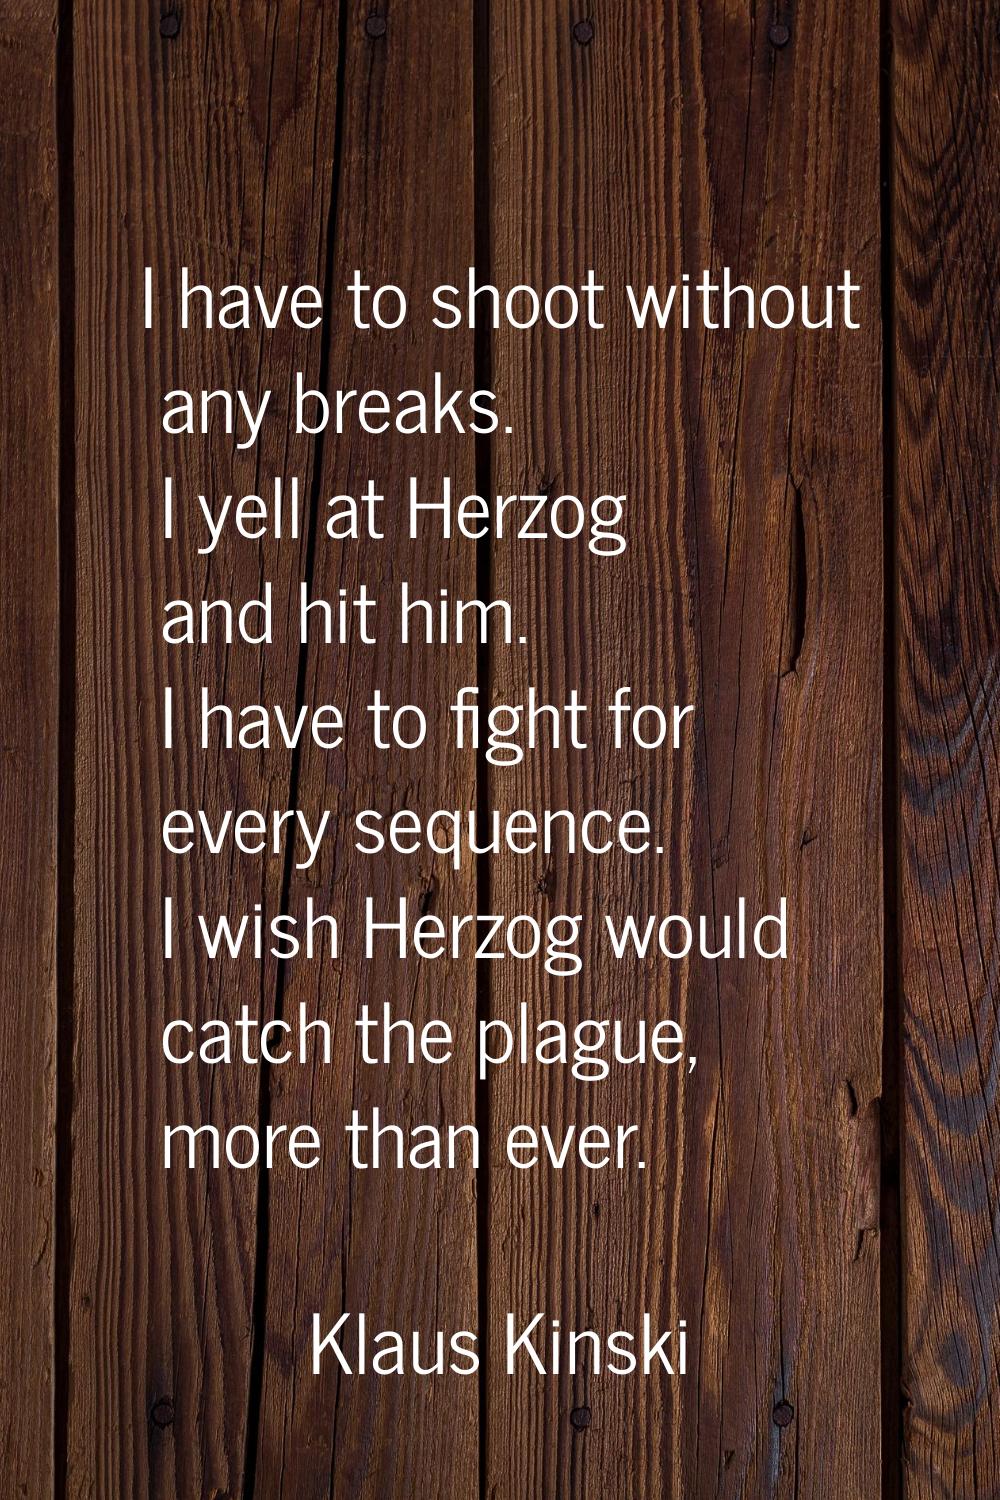 I have to shoot without any breaks. I yell at Herzog and hit him. I have to fight for every sequenc